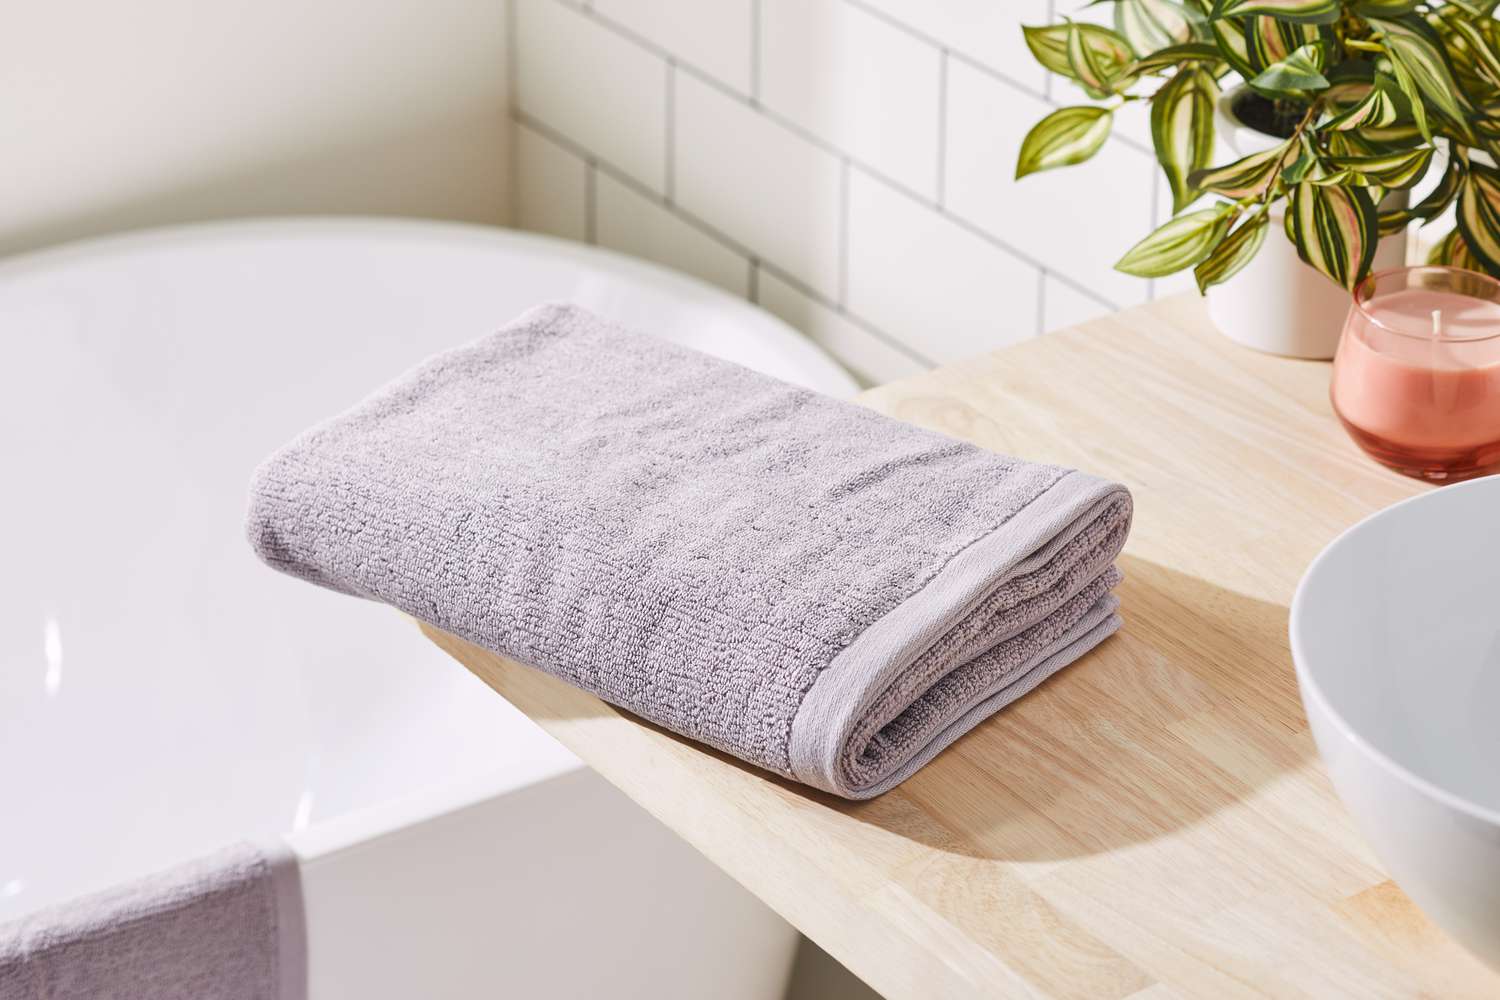 West Elm Everyday Textured Organic Towels on bathroom counter